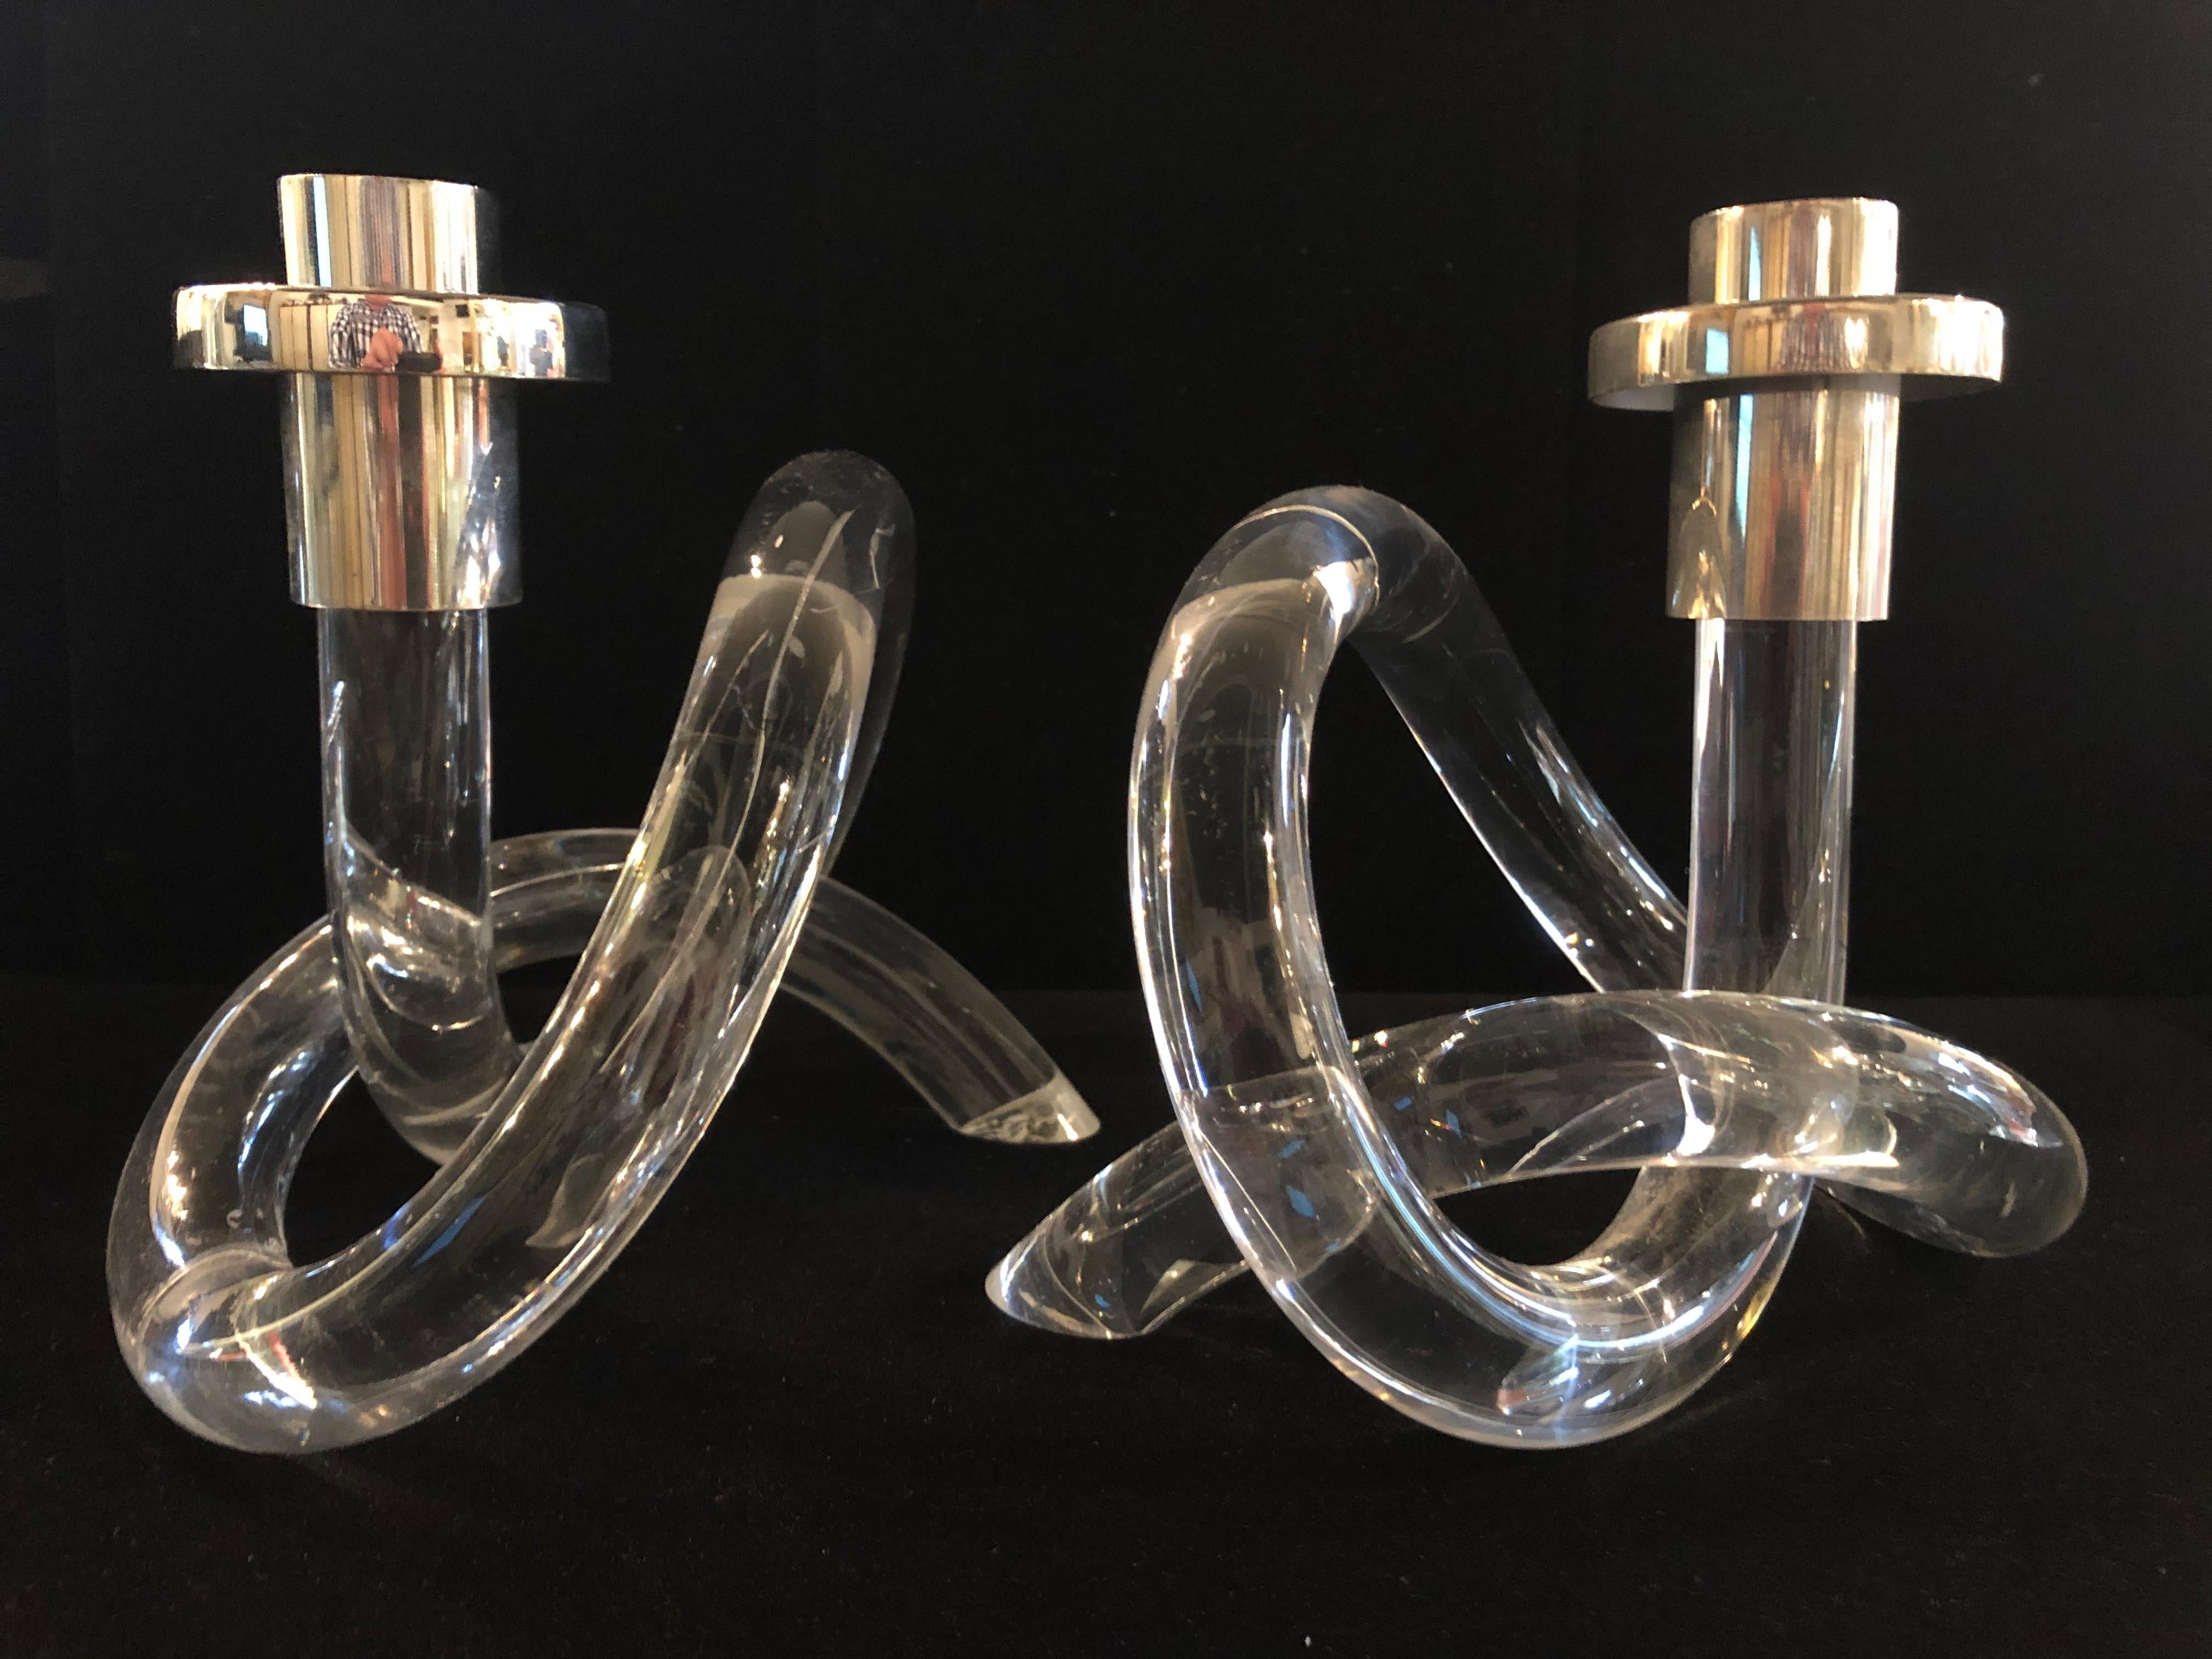 Pair of Dorothy Thorpe twisted Lucite and chrome candlesticks 
In original condition. Slight imperfection interior line in Lucite, shown last two images.